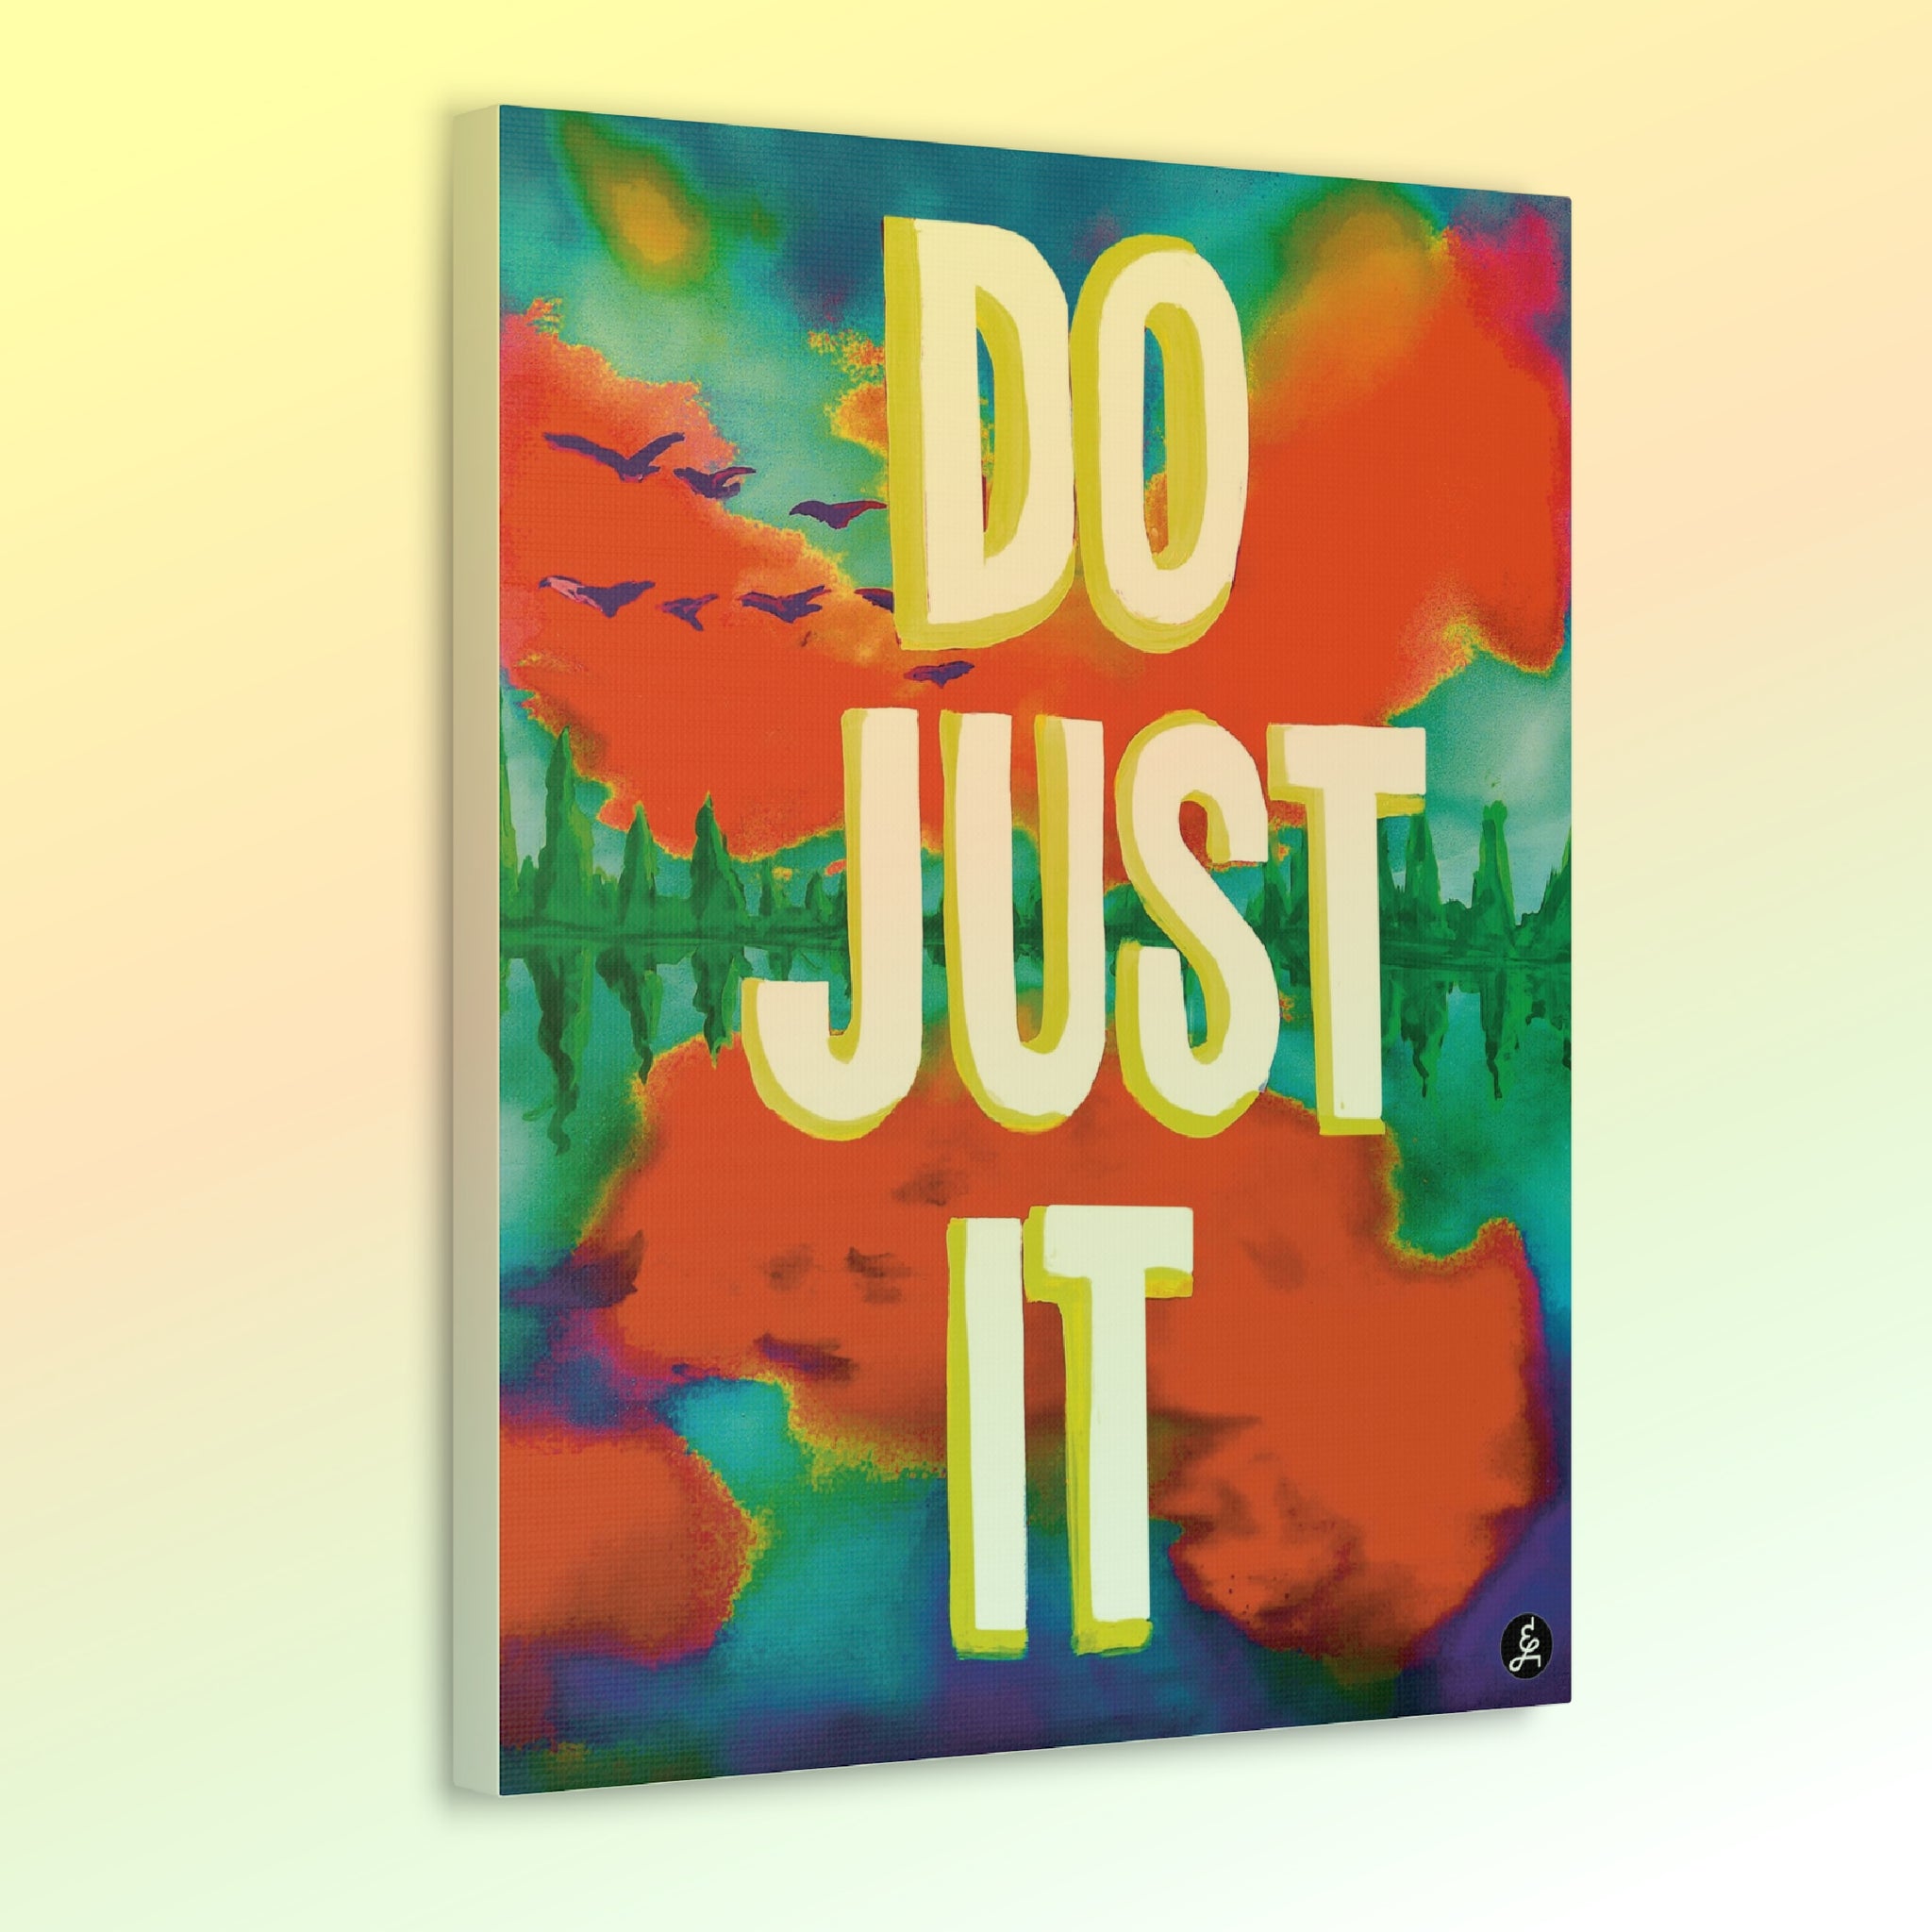 Do it Well - Original Artwork Printed on Canvas